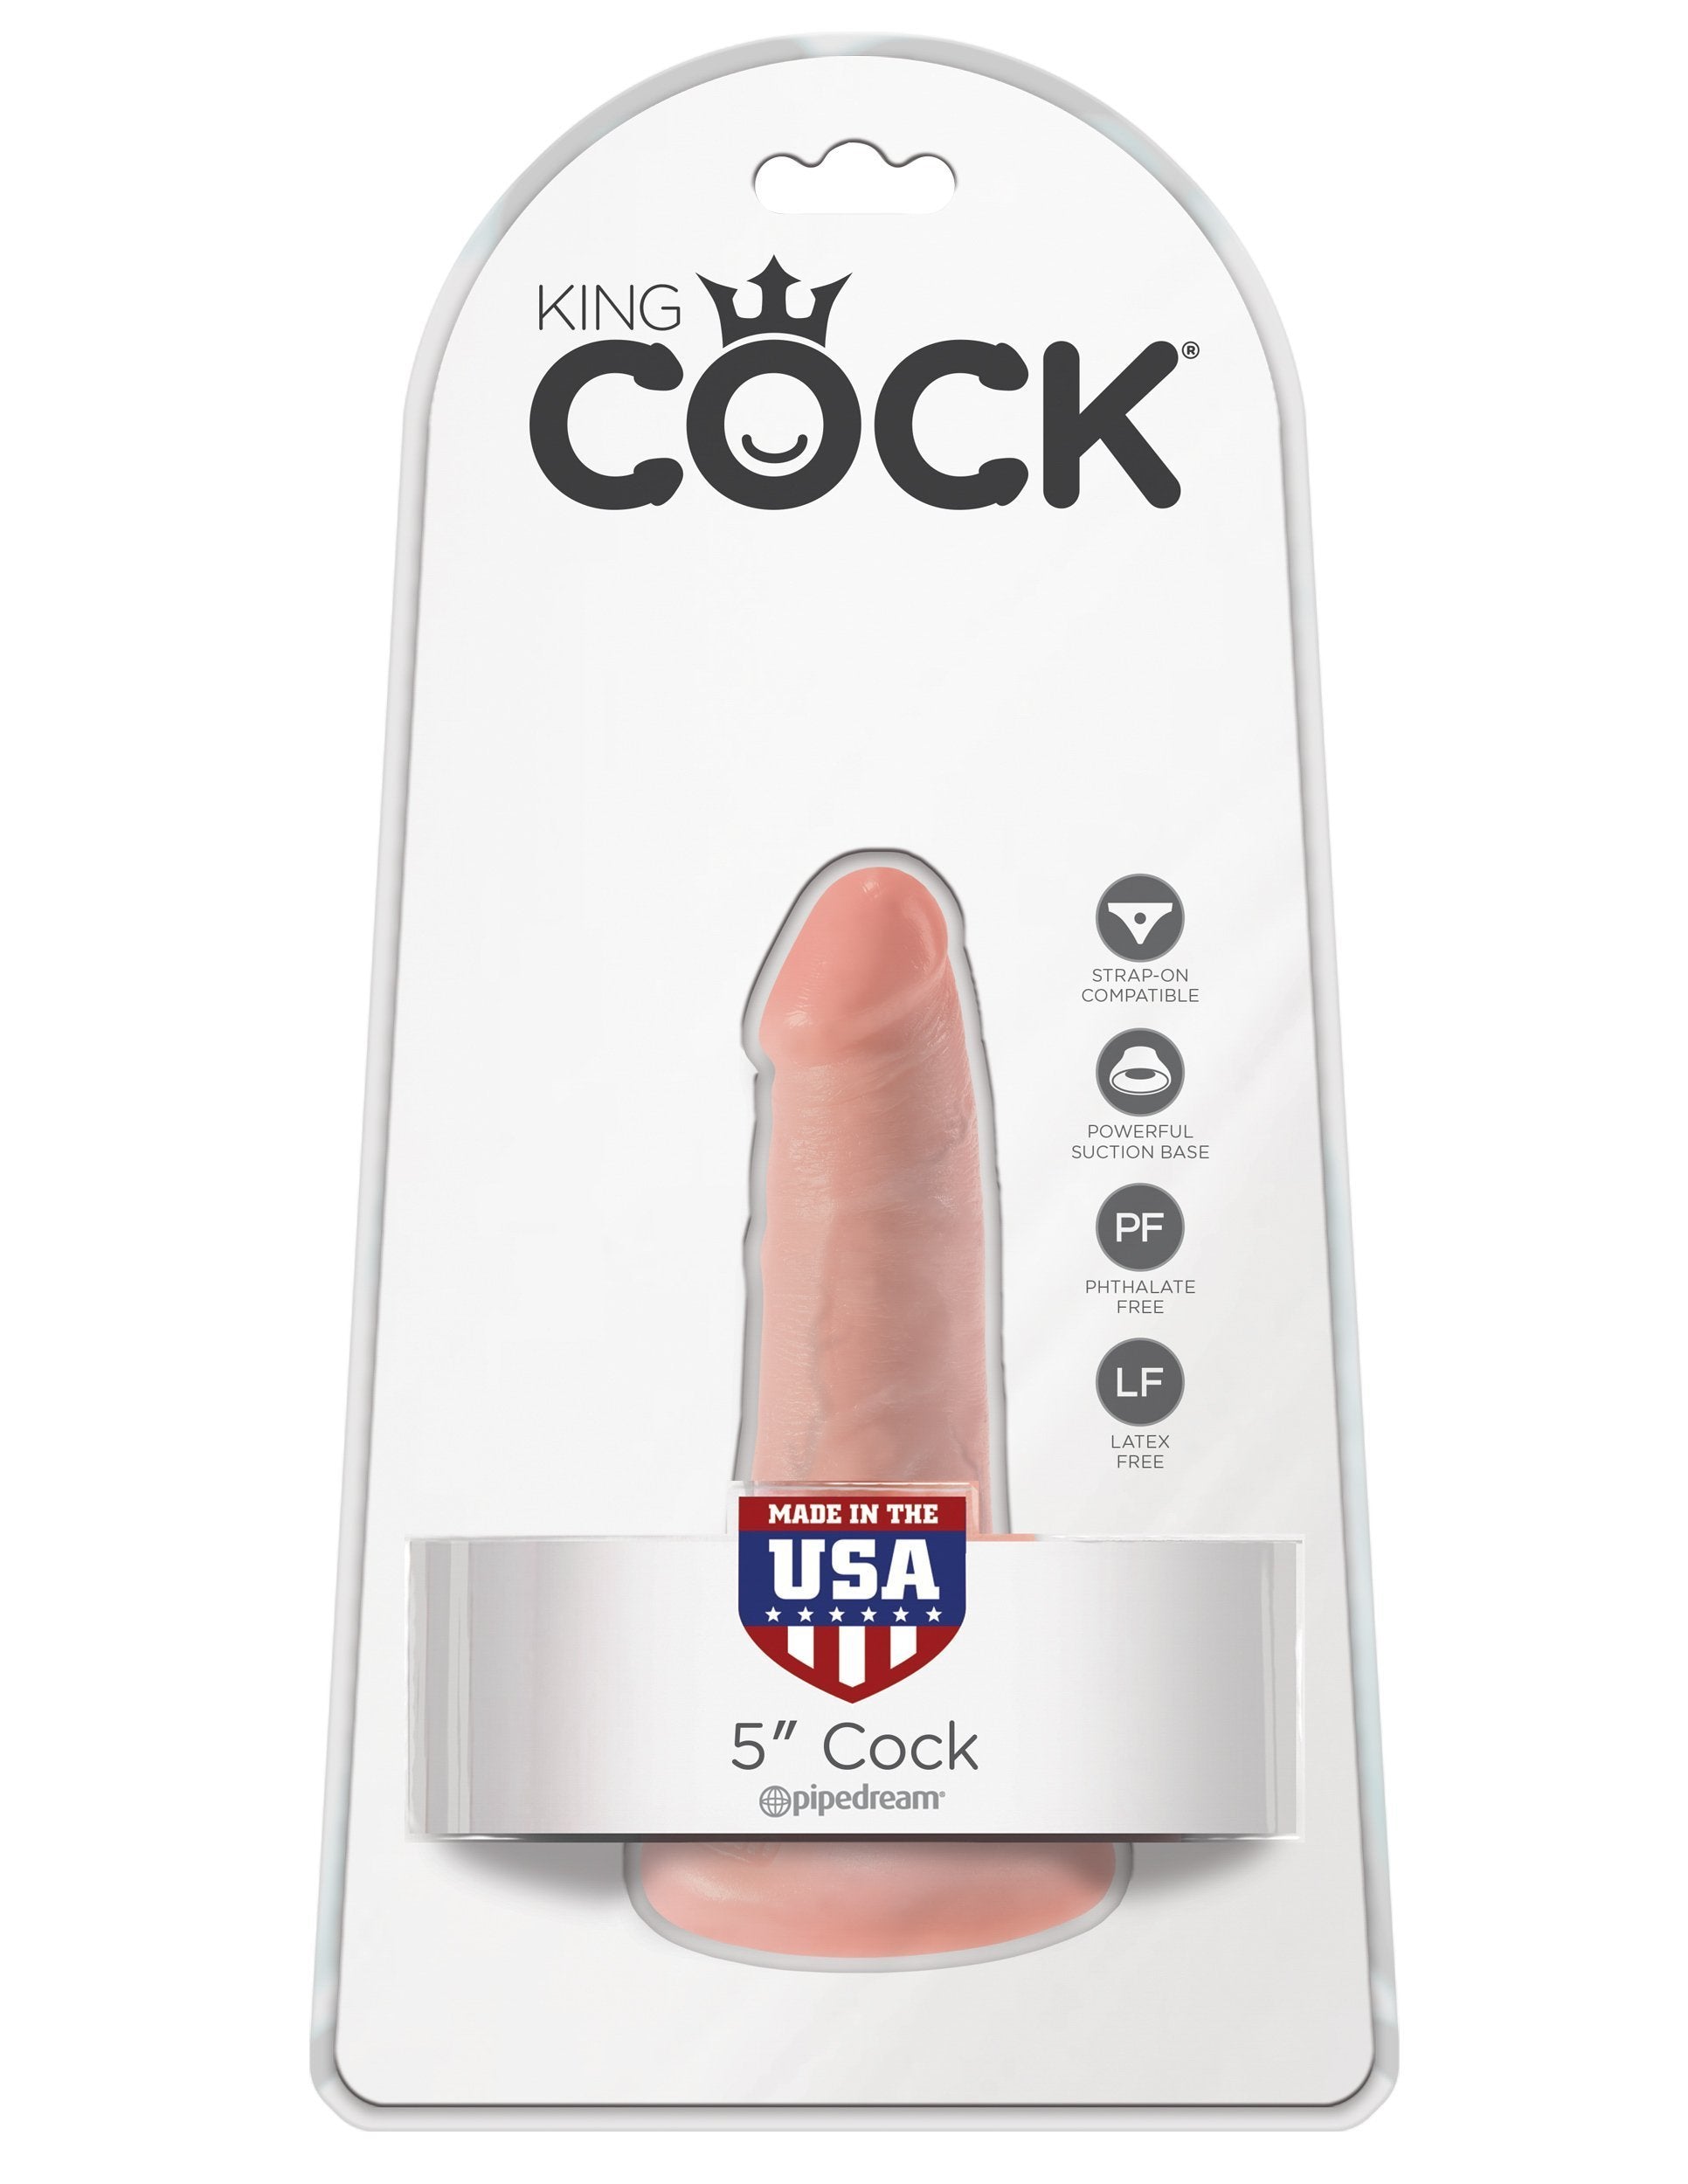 Pipedream - King Cock 5" Cock (Beige) Realistic Dildo with suction cup (Non Vibration) Singapore